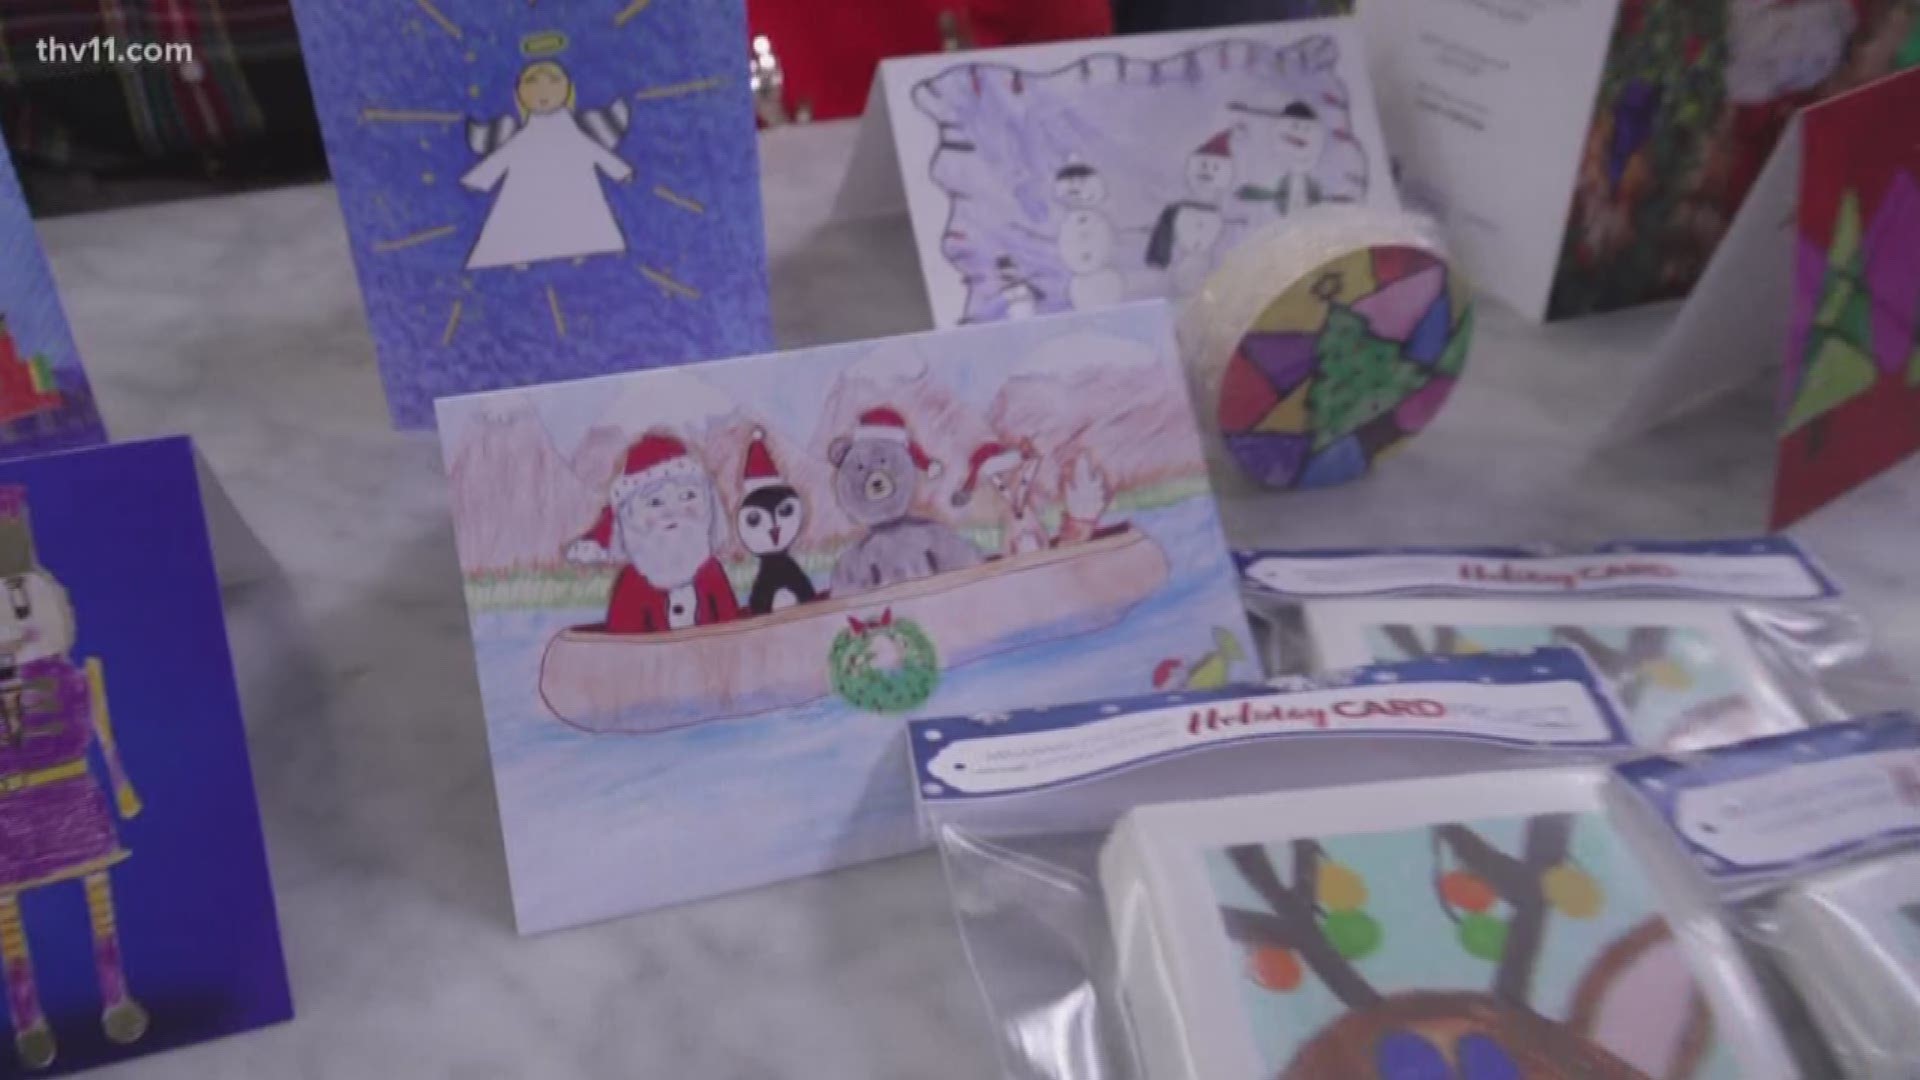 This year is the Arkansas Children's Hospital 51st Annual Holiday Card Project featuring current and former patient's artwork.